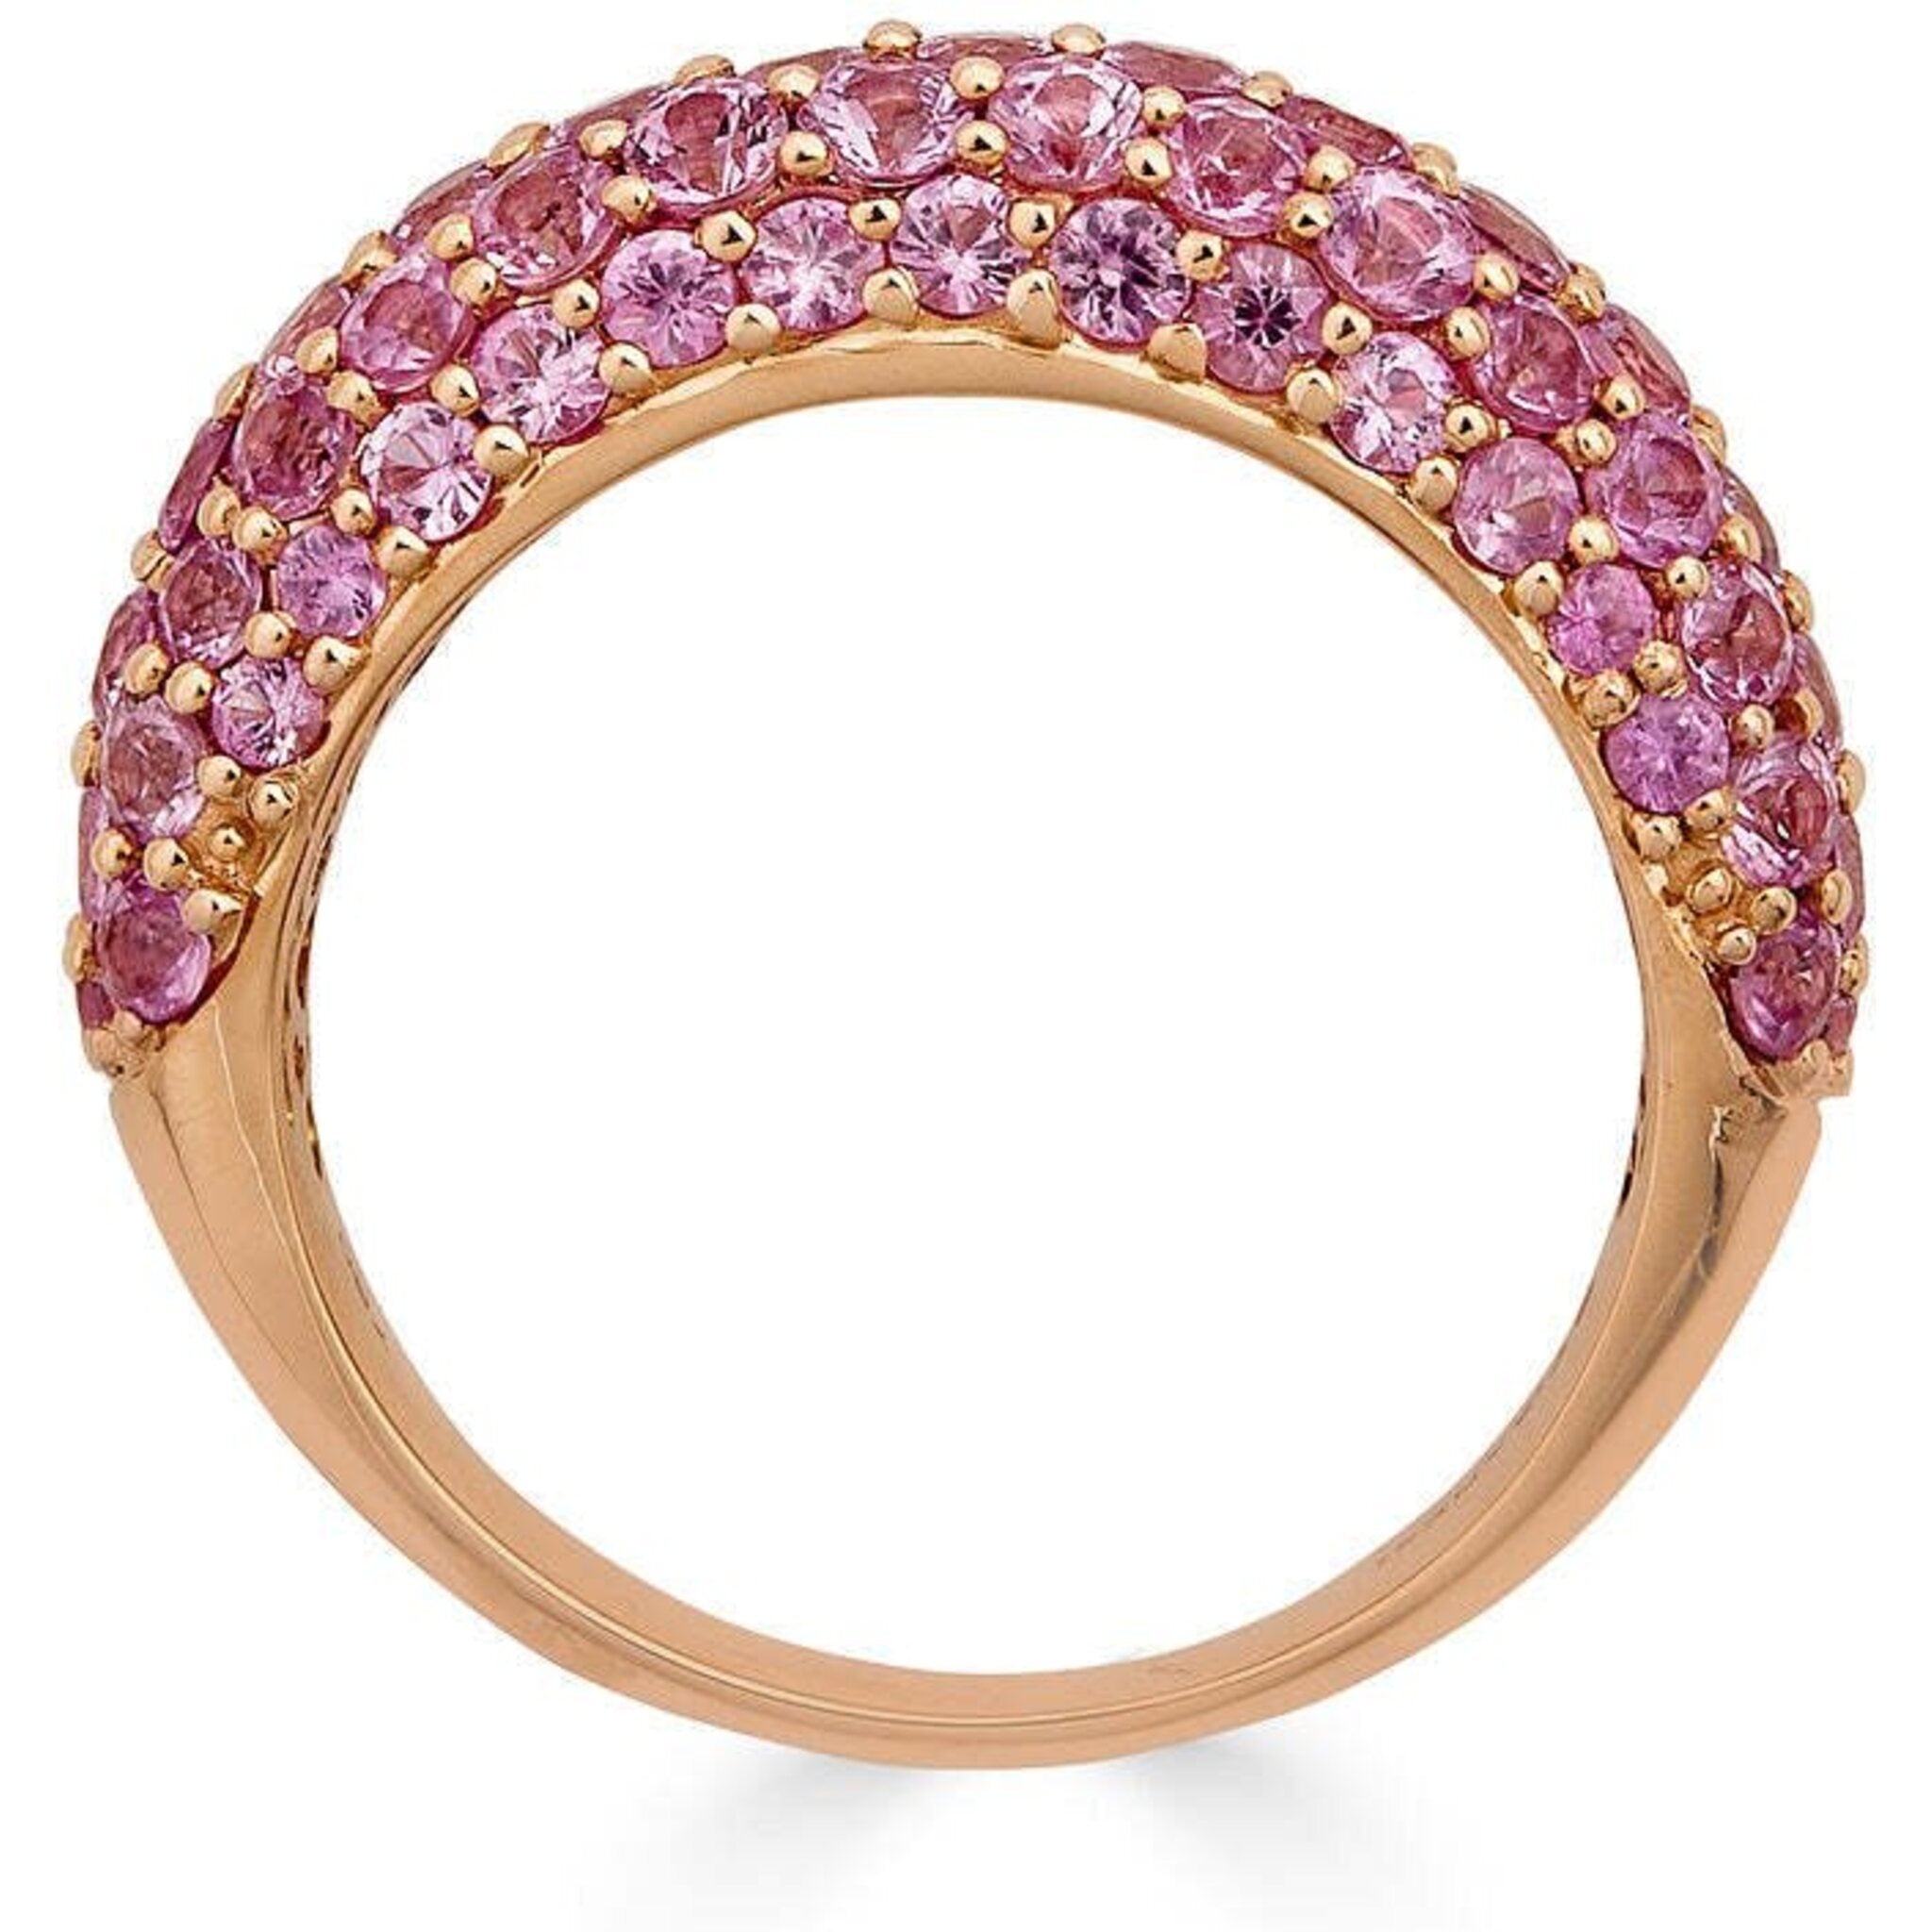 Piranesi - Small Dome Ring in Pink Sapphire - 18K Rose Gold